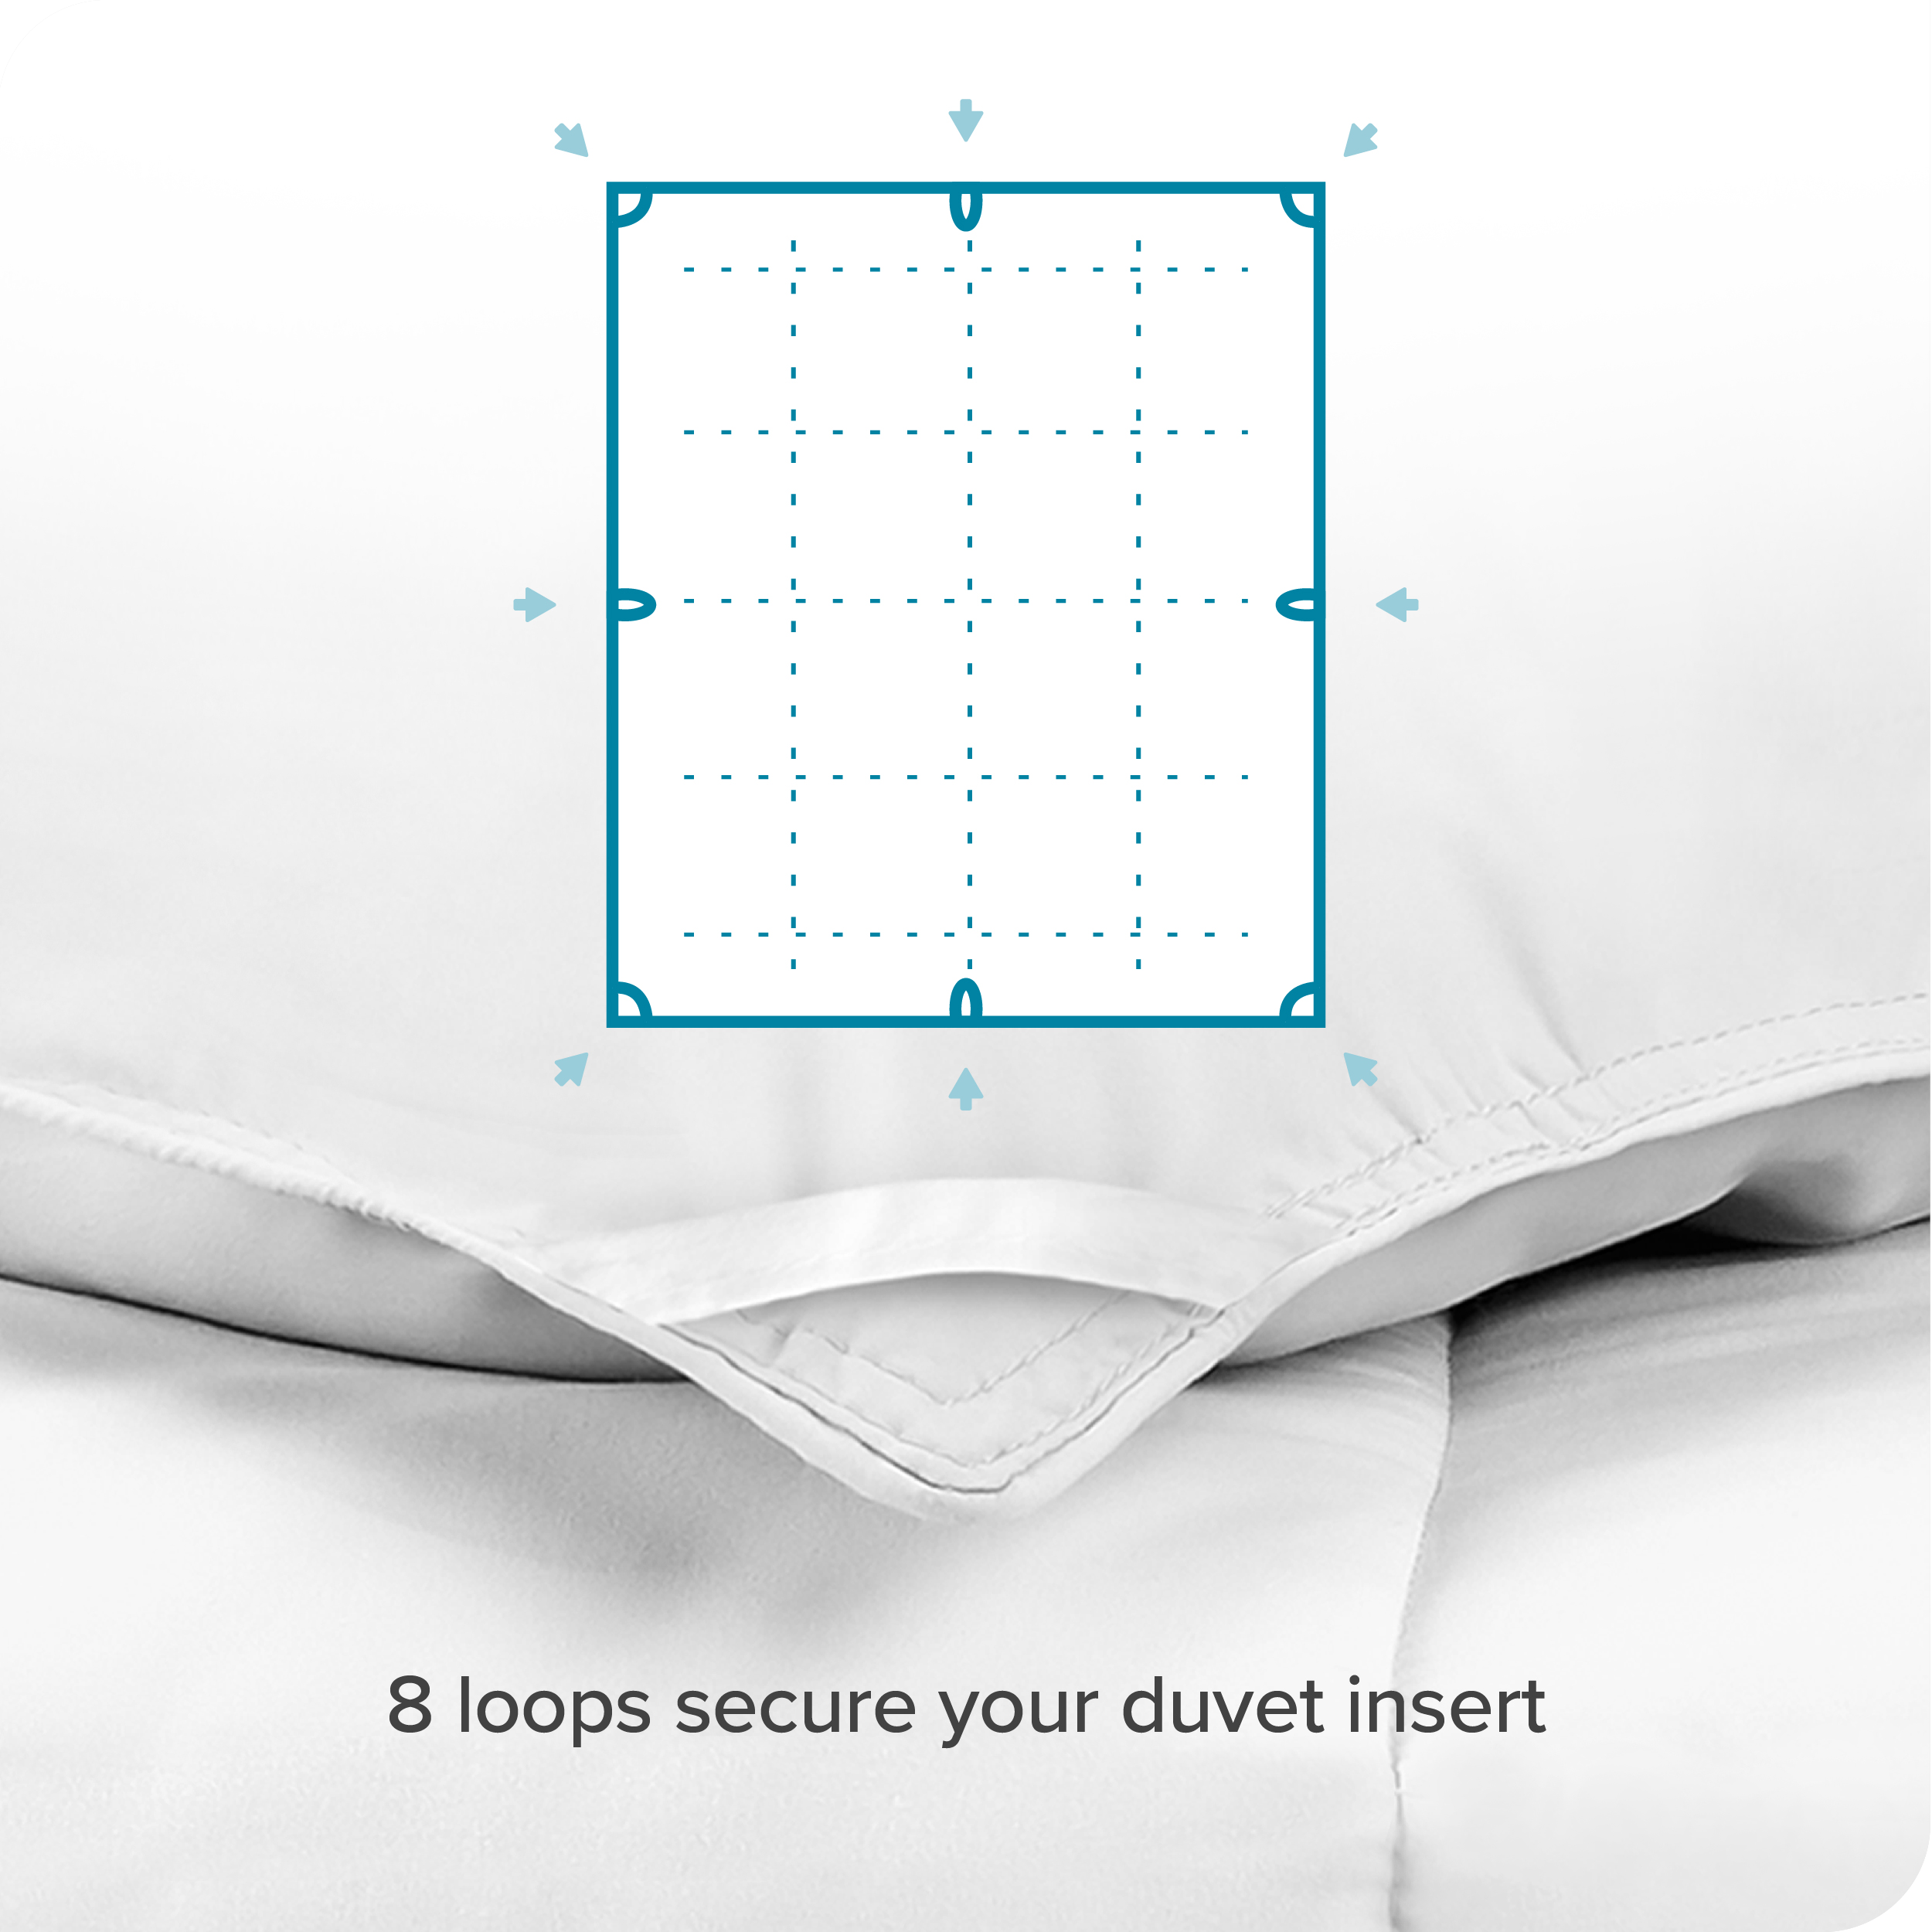 Diagram which shows the loops on the duvet insert